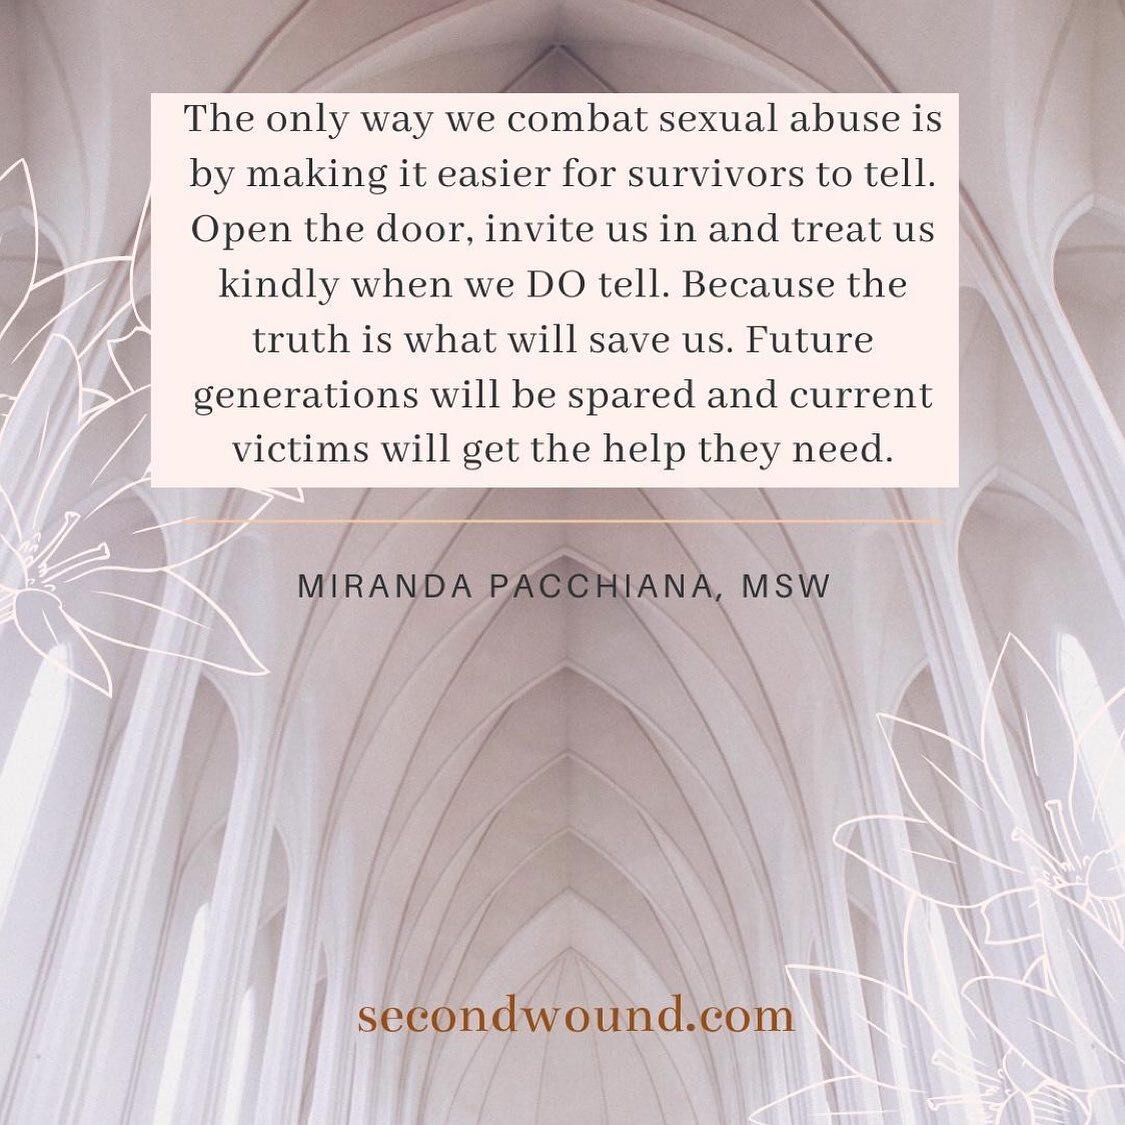 Repost from @thesecondwound
&bull;
Did you know that 70% of rapes happen against children? 1 in 4 girls and 1 in 6 boys will be sexually abused before age 18. As difficult as these truths are to take in, we must LOOK at the epidemic of child sexual a